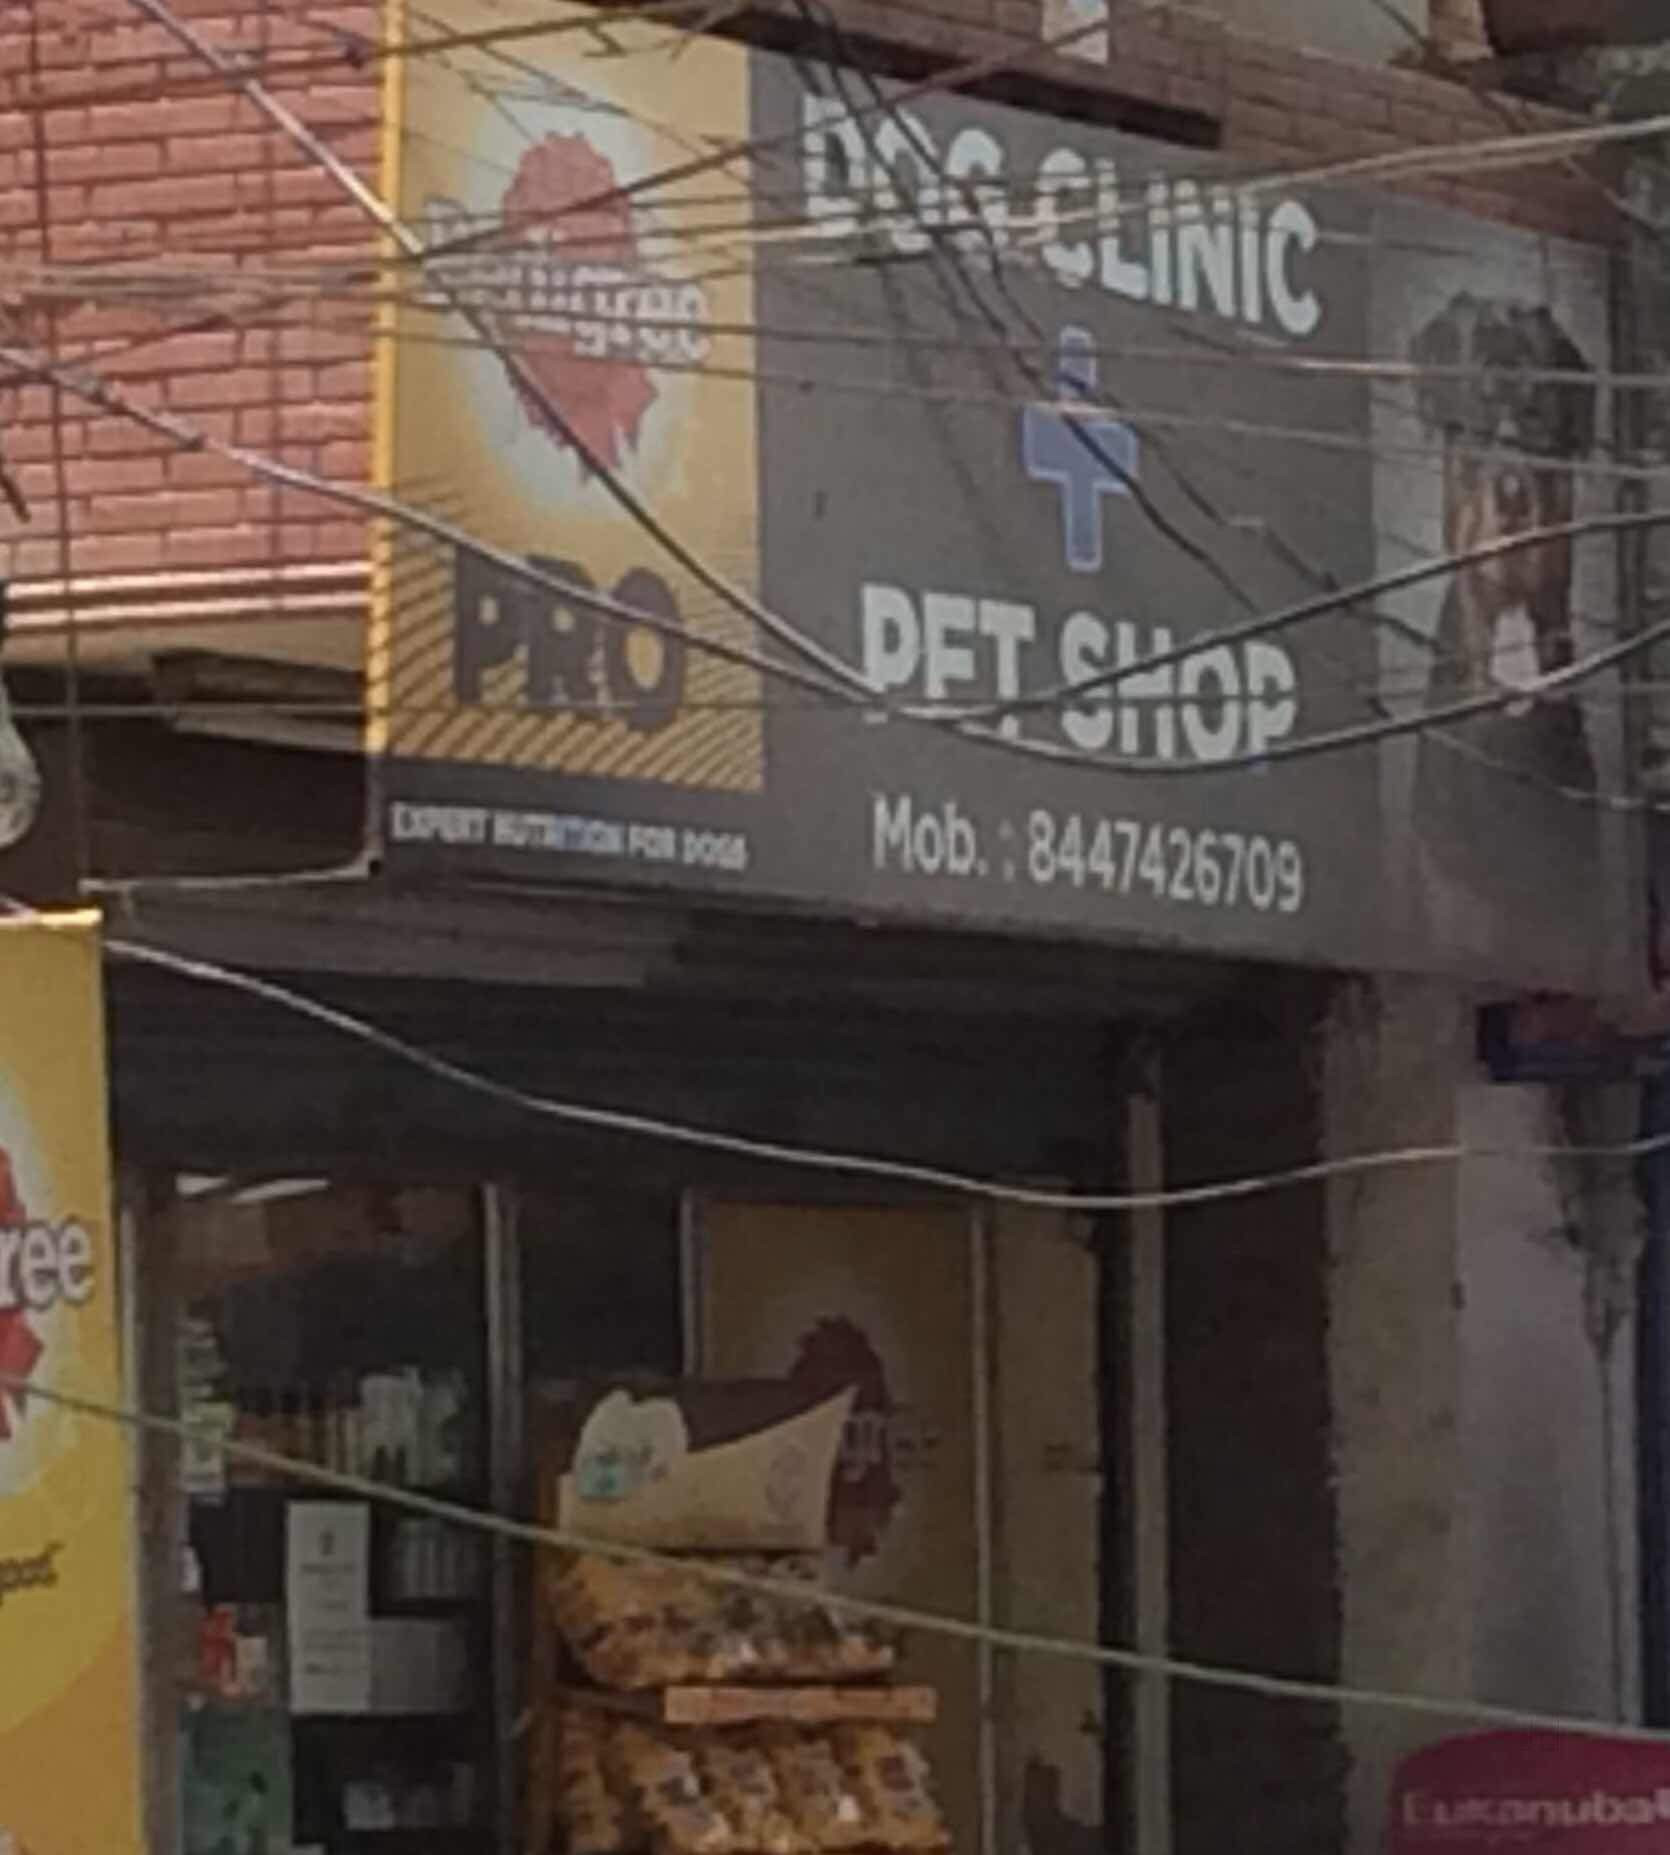 Dog Clinic and Pet Shop